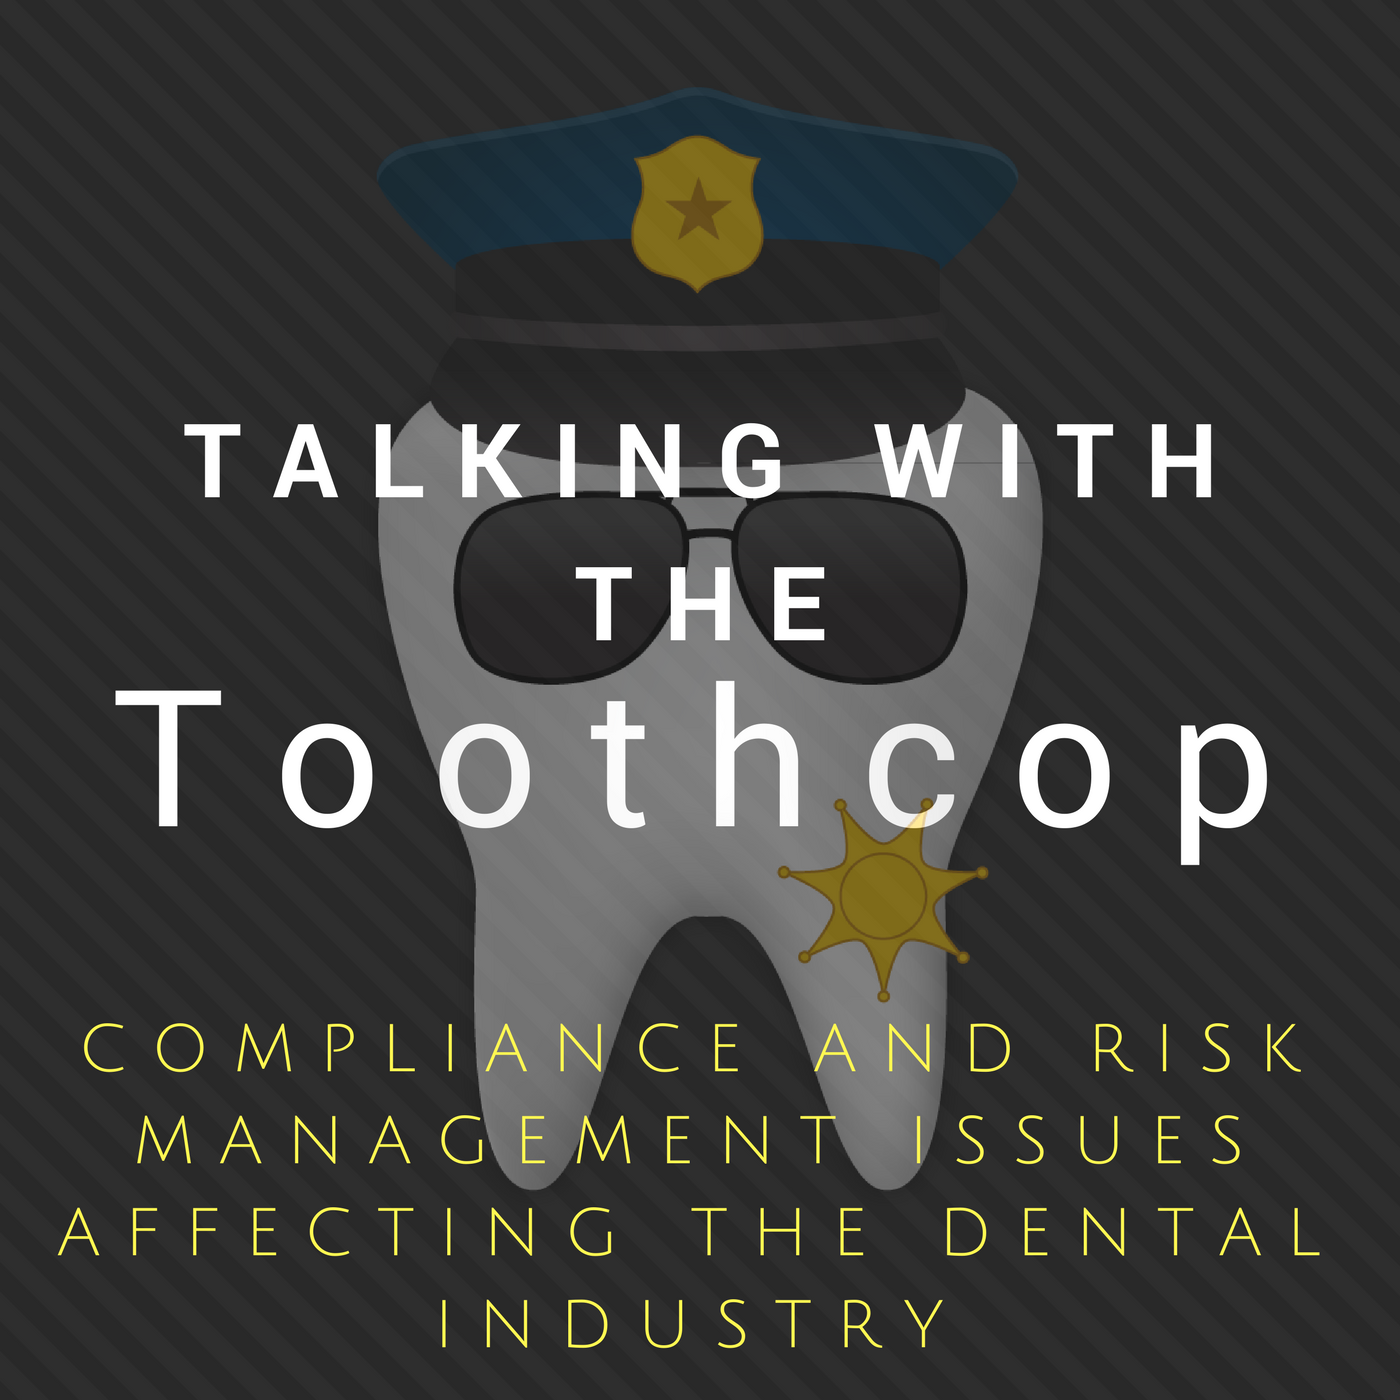 The Importance of Dental Policies and Procedures